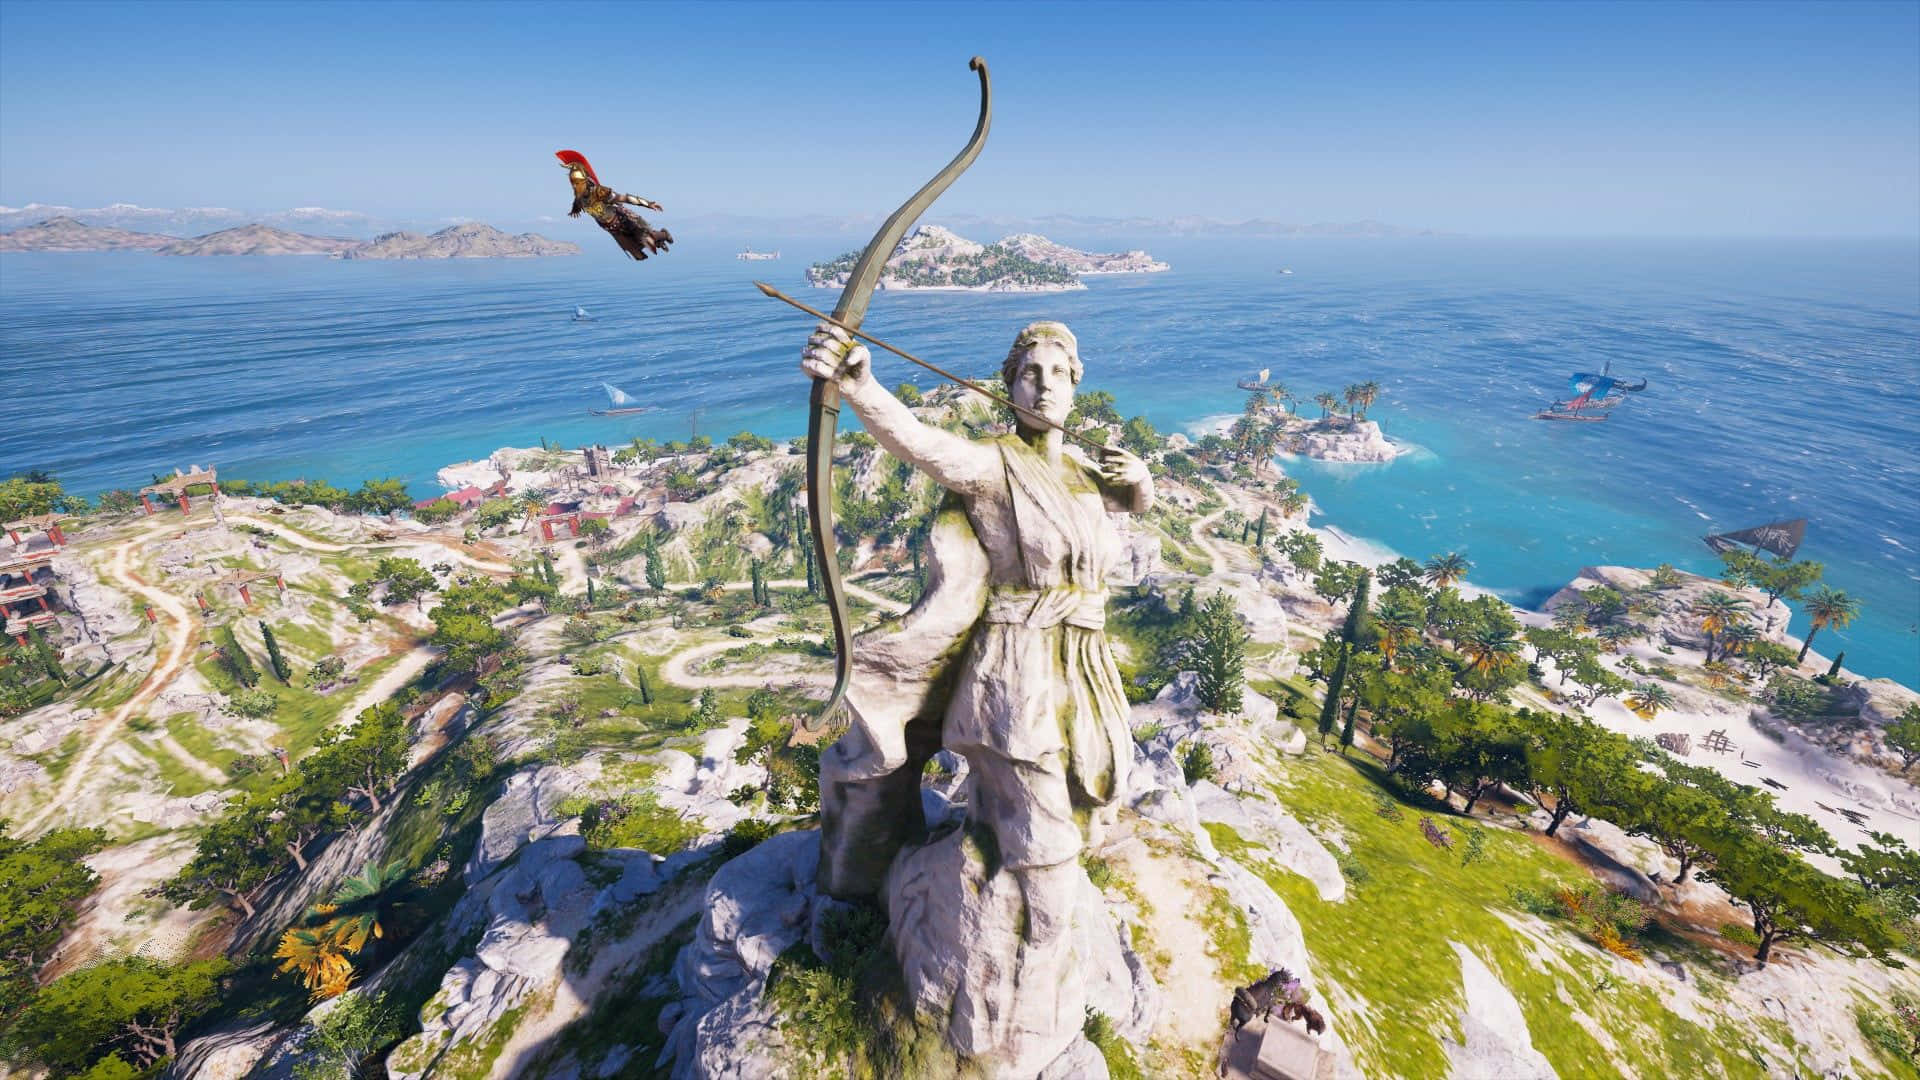 200+] Assassin's Creed Odyssey Background s 